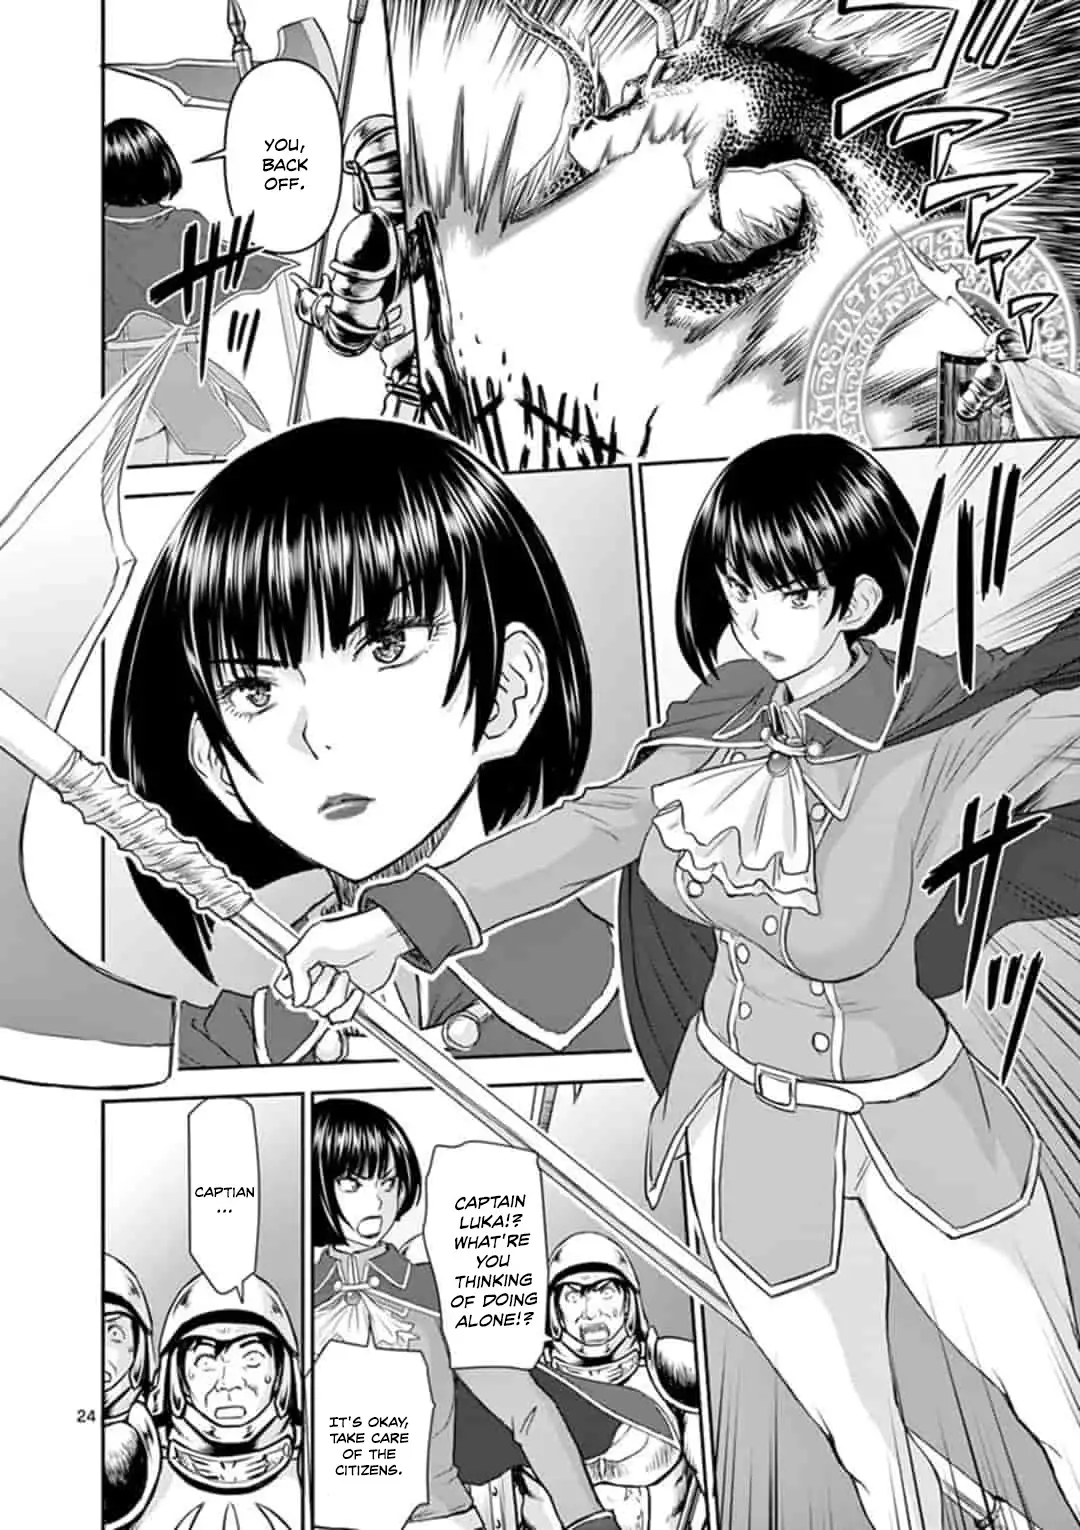 Isekai Affair ~Ten Years After The Demon King's Subjugation, The Married Former Hero And The Female Warrior Who Lost Her Husband ~ - 1 page 24